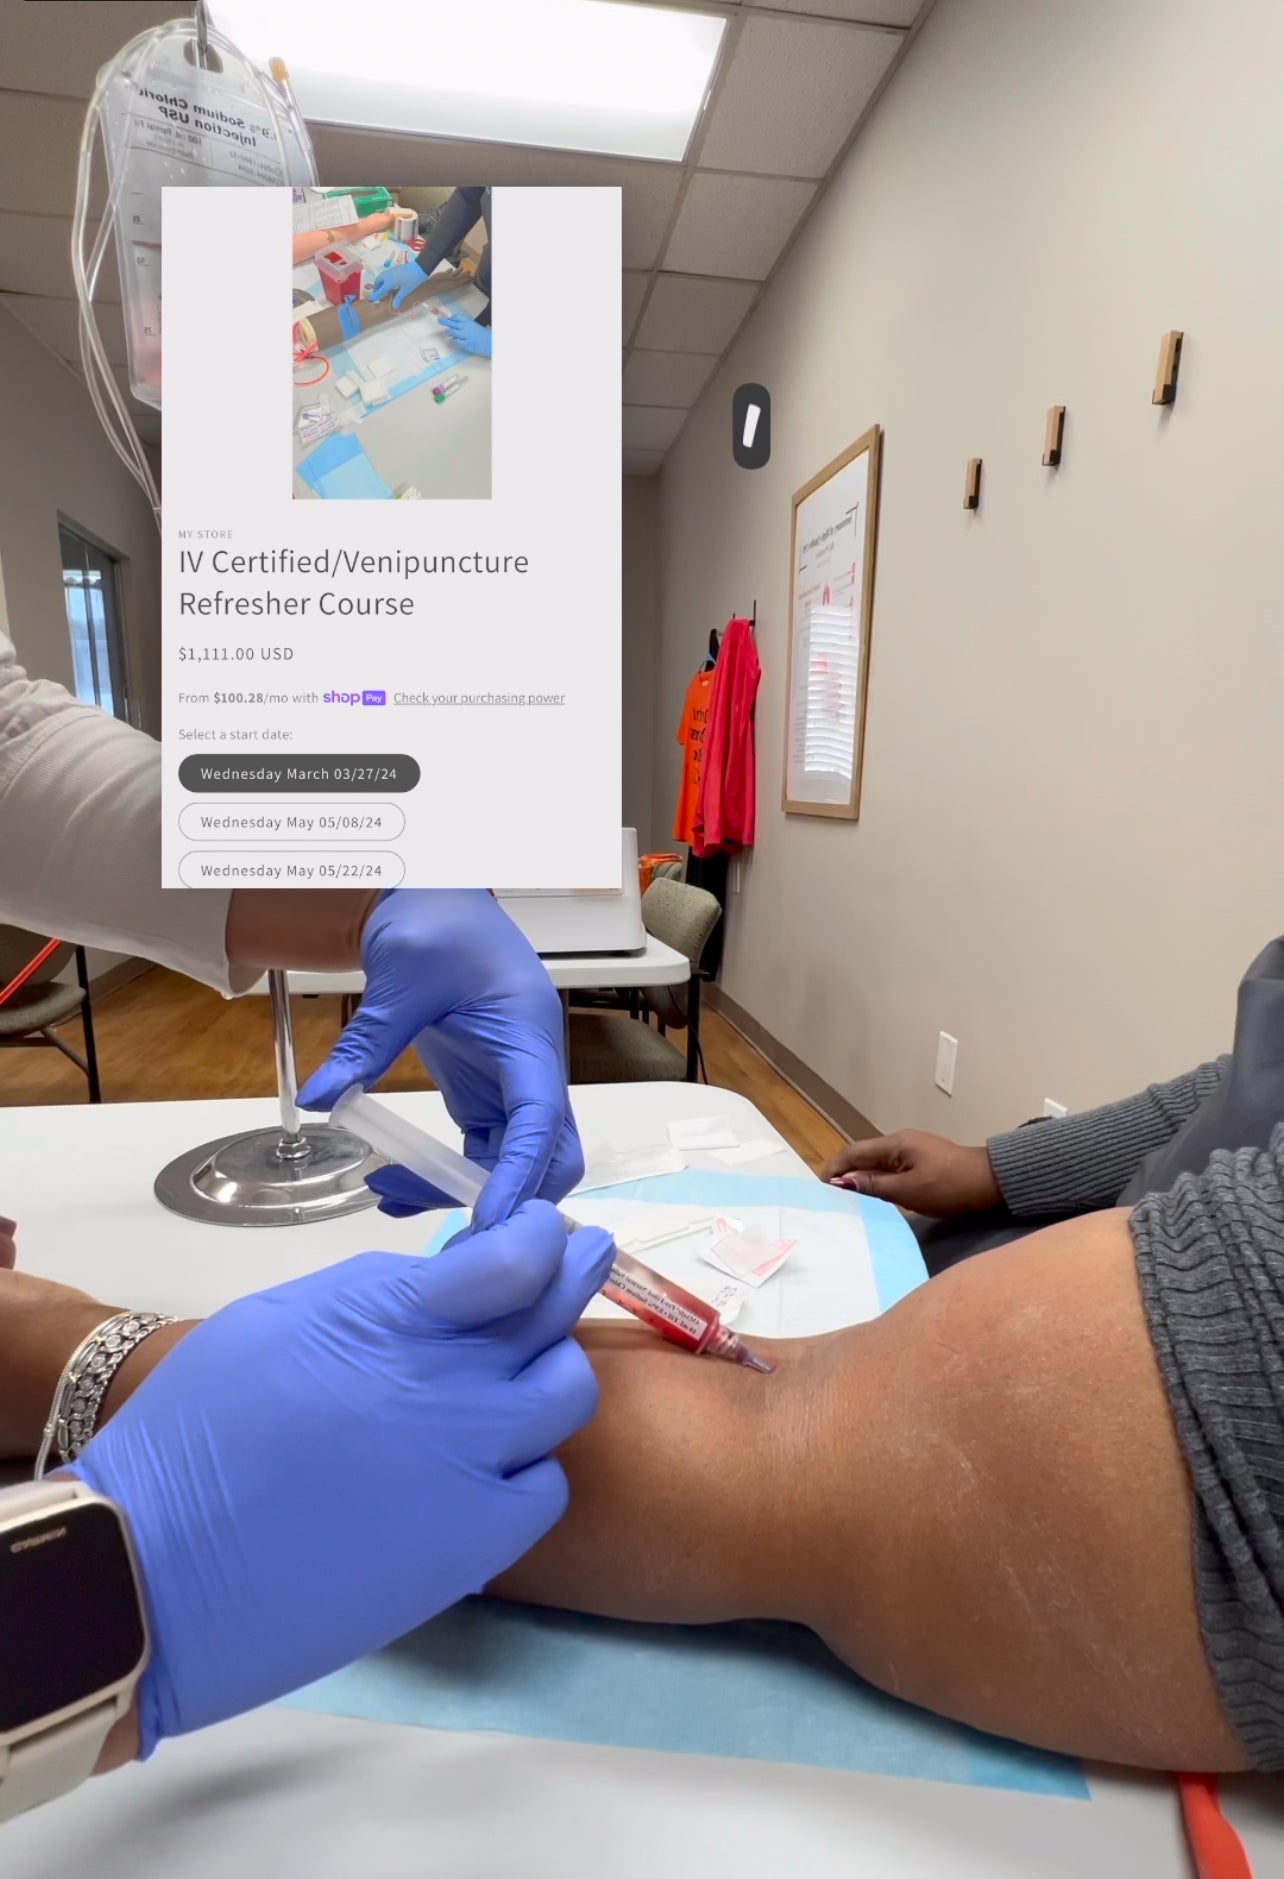 IV Certified/Venipuncture Refresher Course